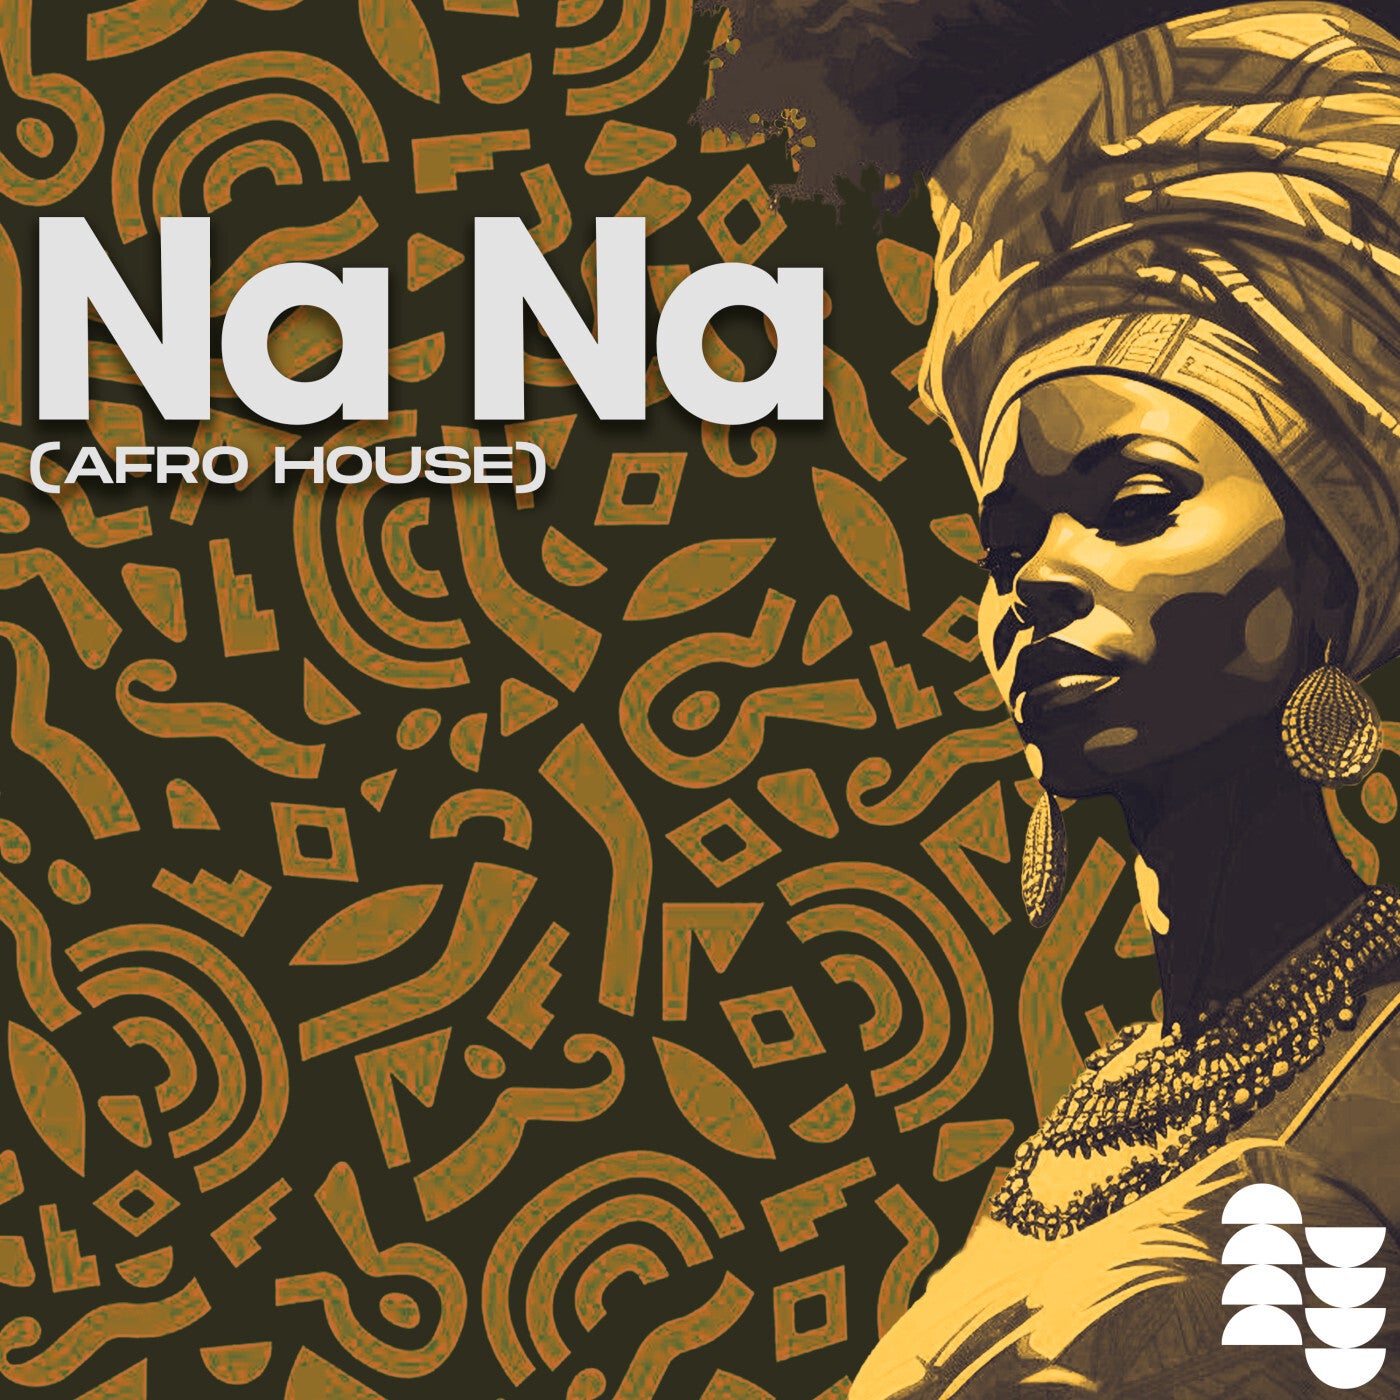 image cover: Benja Murano - Na Na (Afro House) on Frescura Records